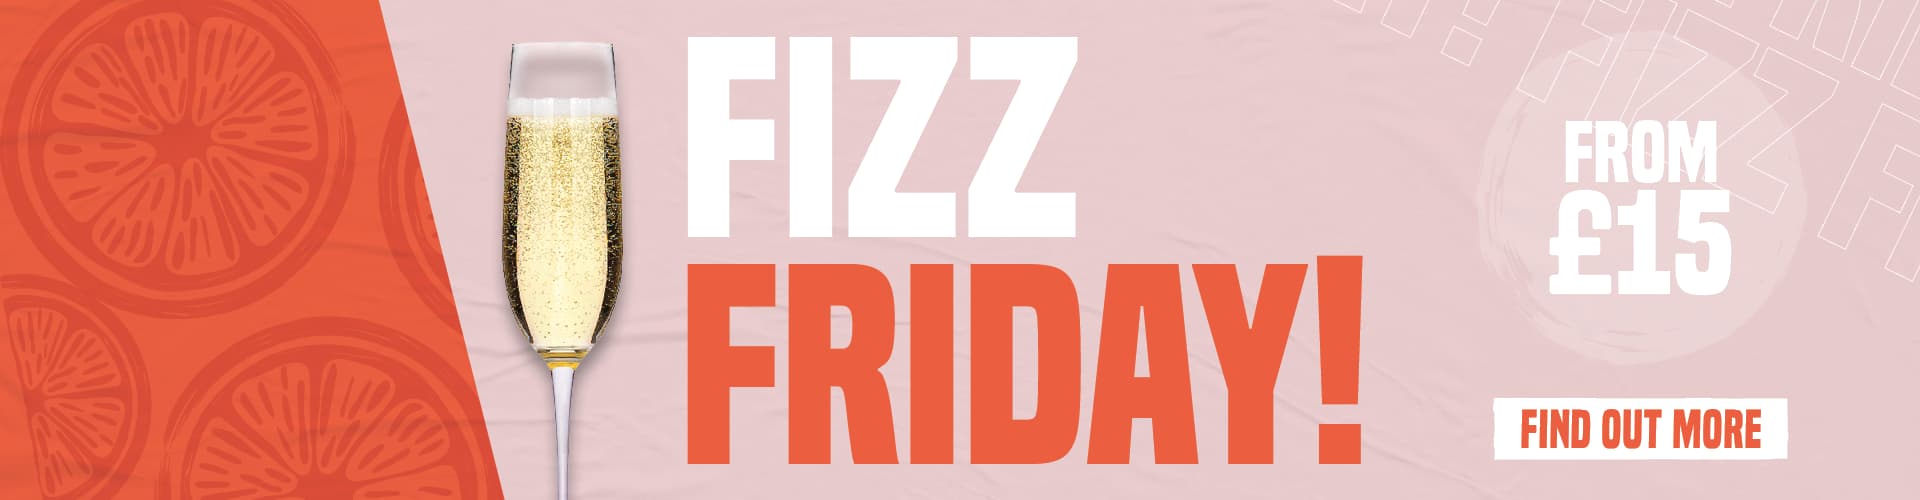 Fizz Friday, from £15. Find out more.